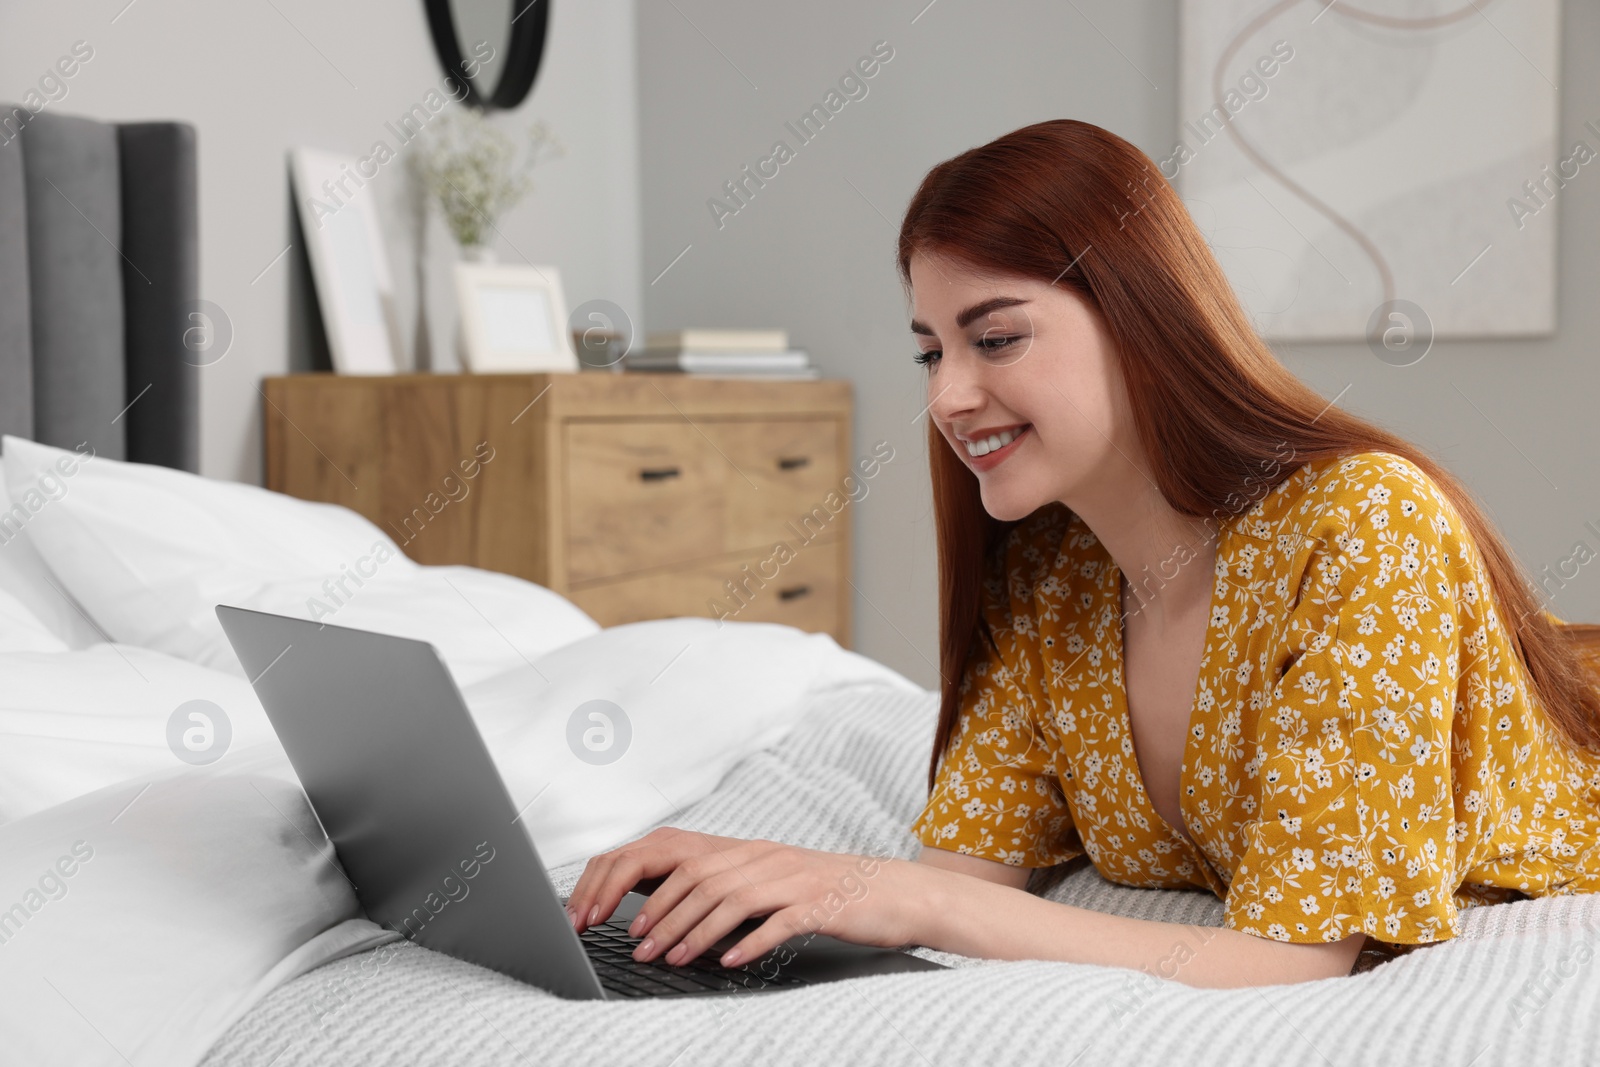 Photo of Happy woman using laptop on bed in bedroom